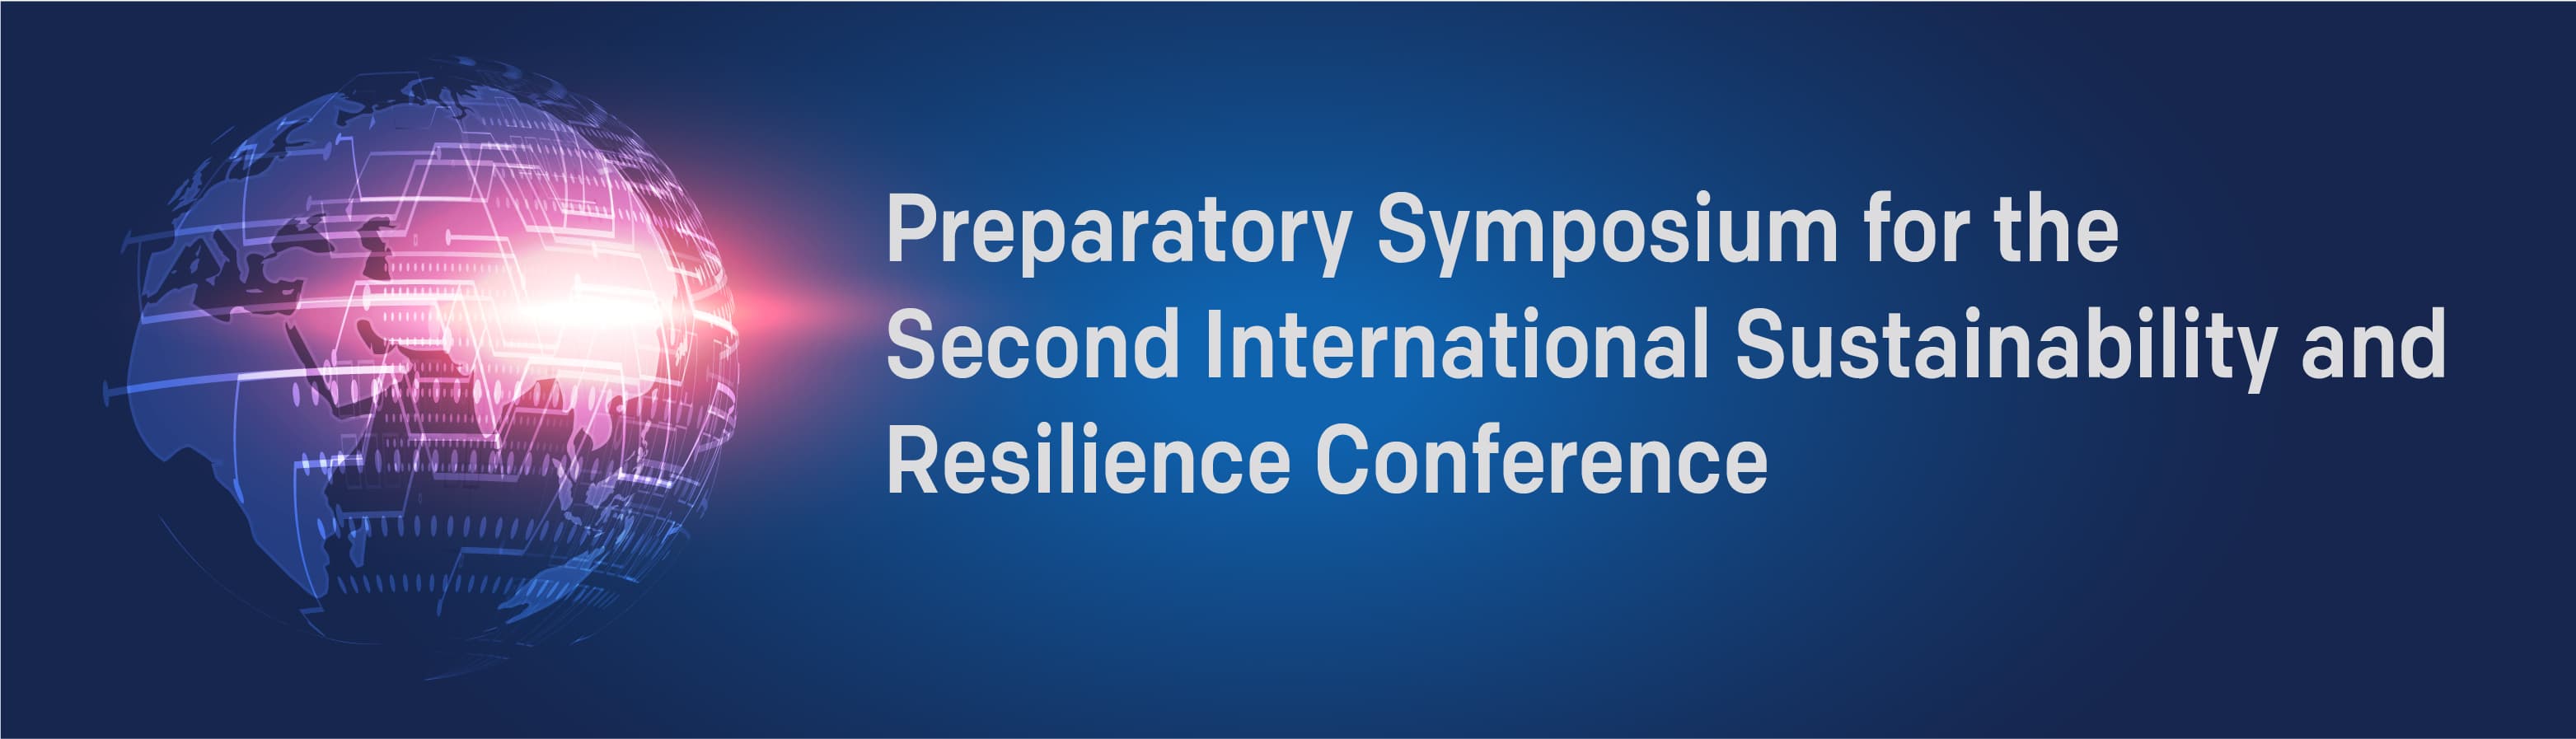 PS4SR - Preparatory Symposium for the Second International Sustainability and Resilience Conference 